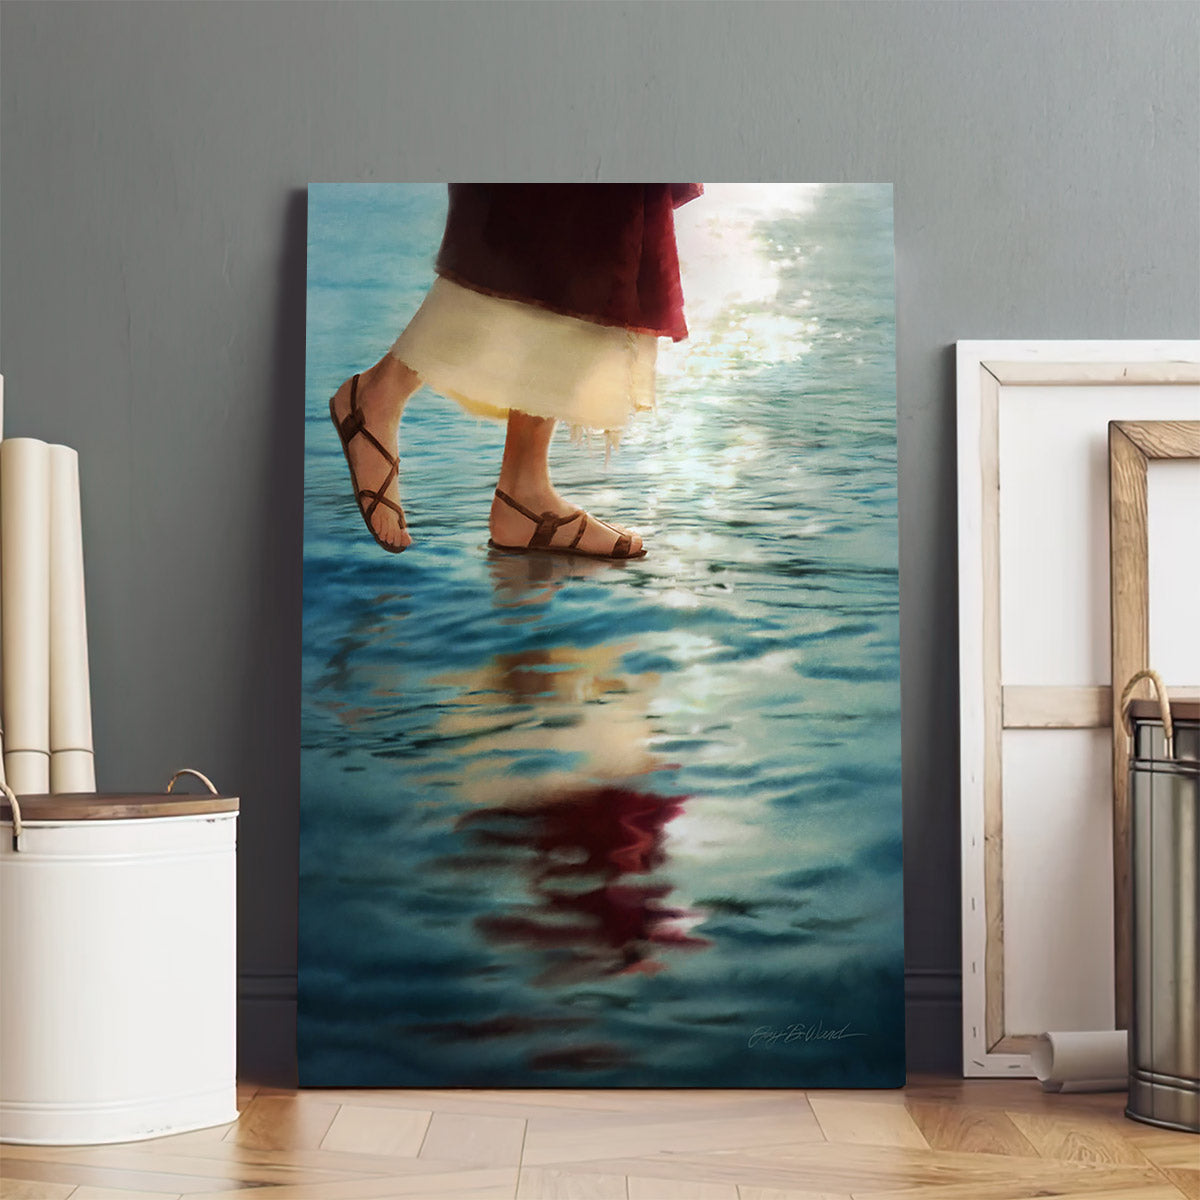 Where Jesus Walked Canvas Picture - Jesus Christ Canvas Art - Christian Wall Canvas